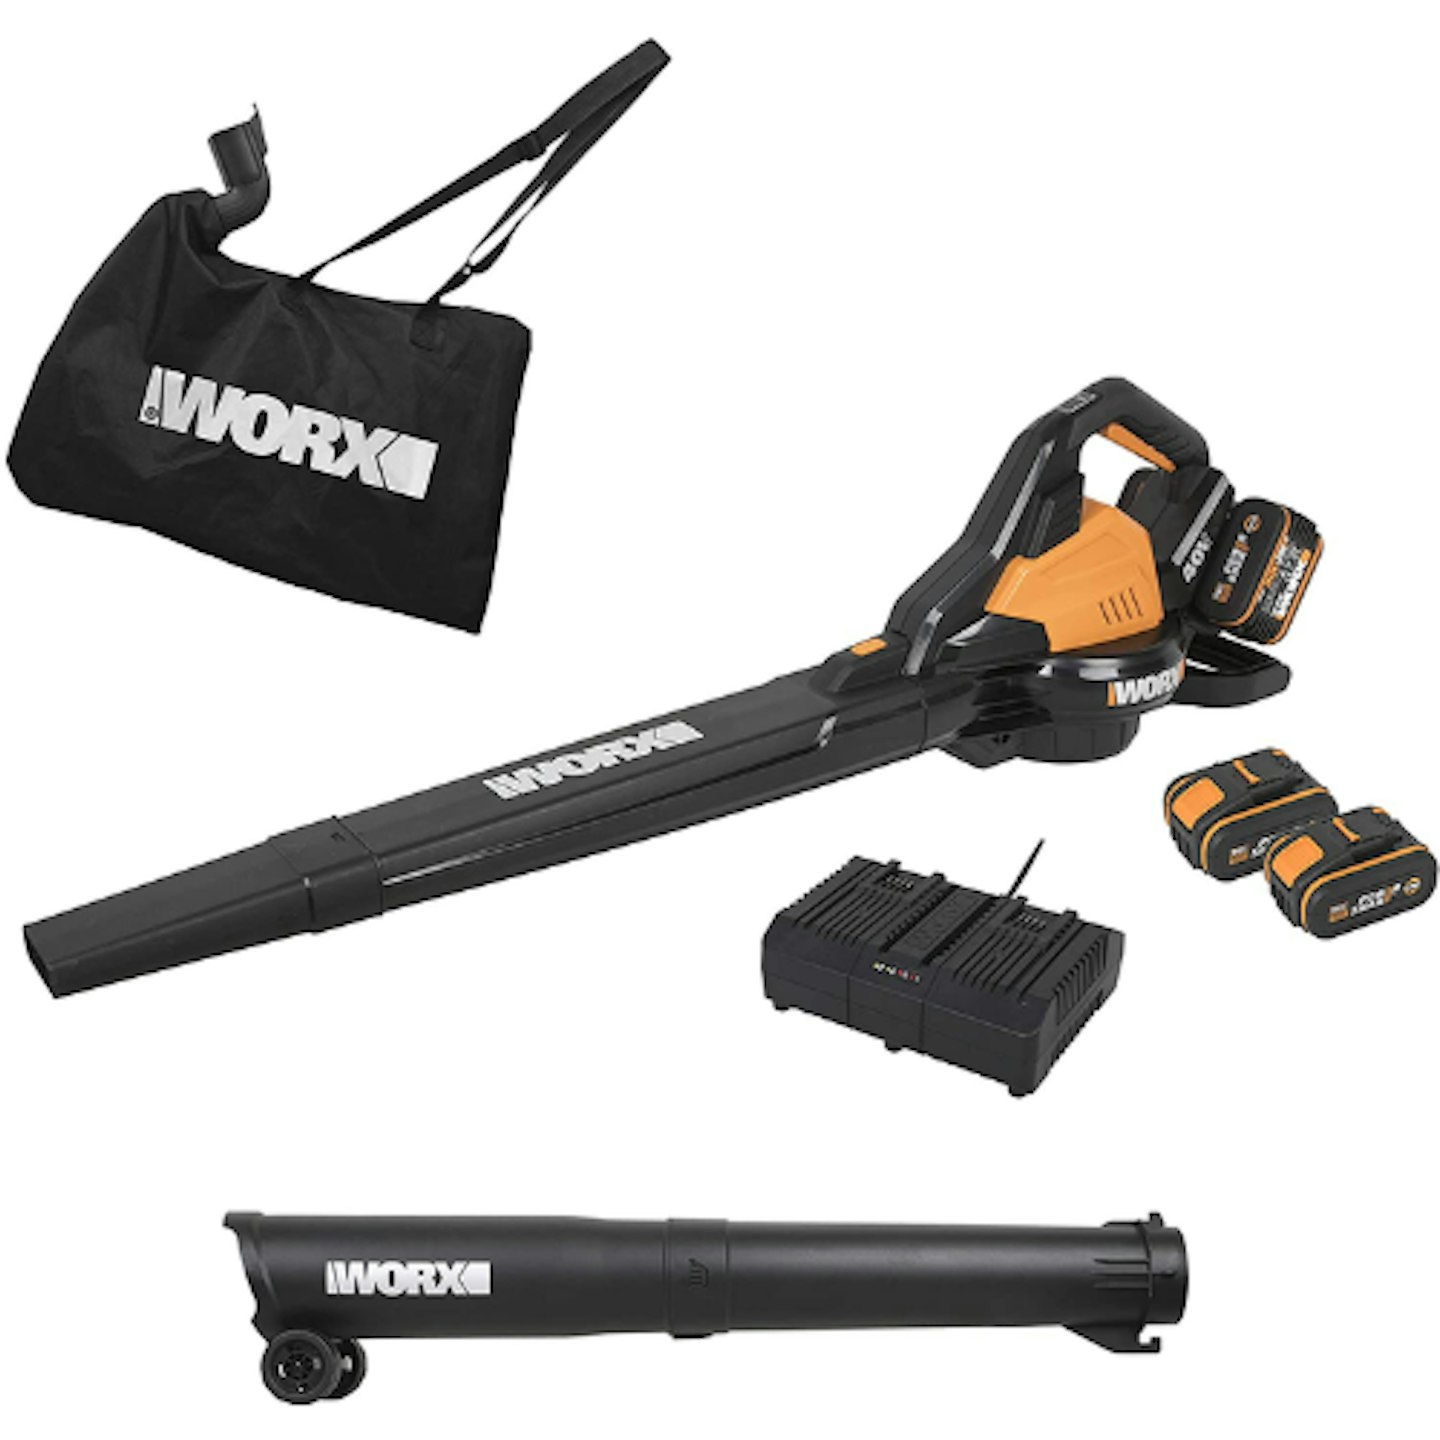 The Worx 20V Leafjet Cordless Leaf Blower Lasts Longer Between Charges